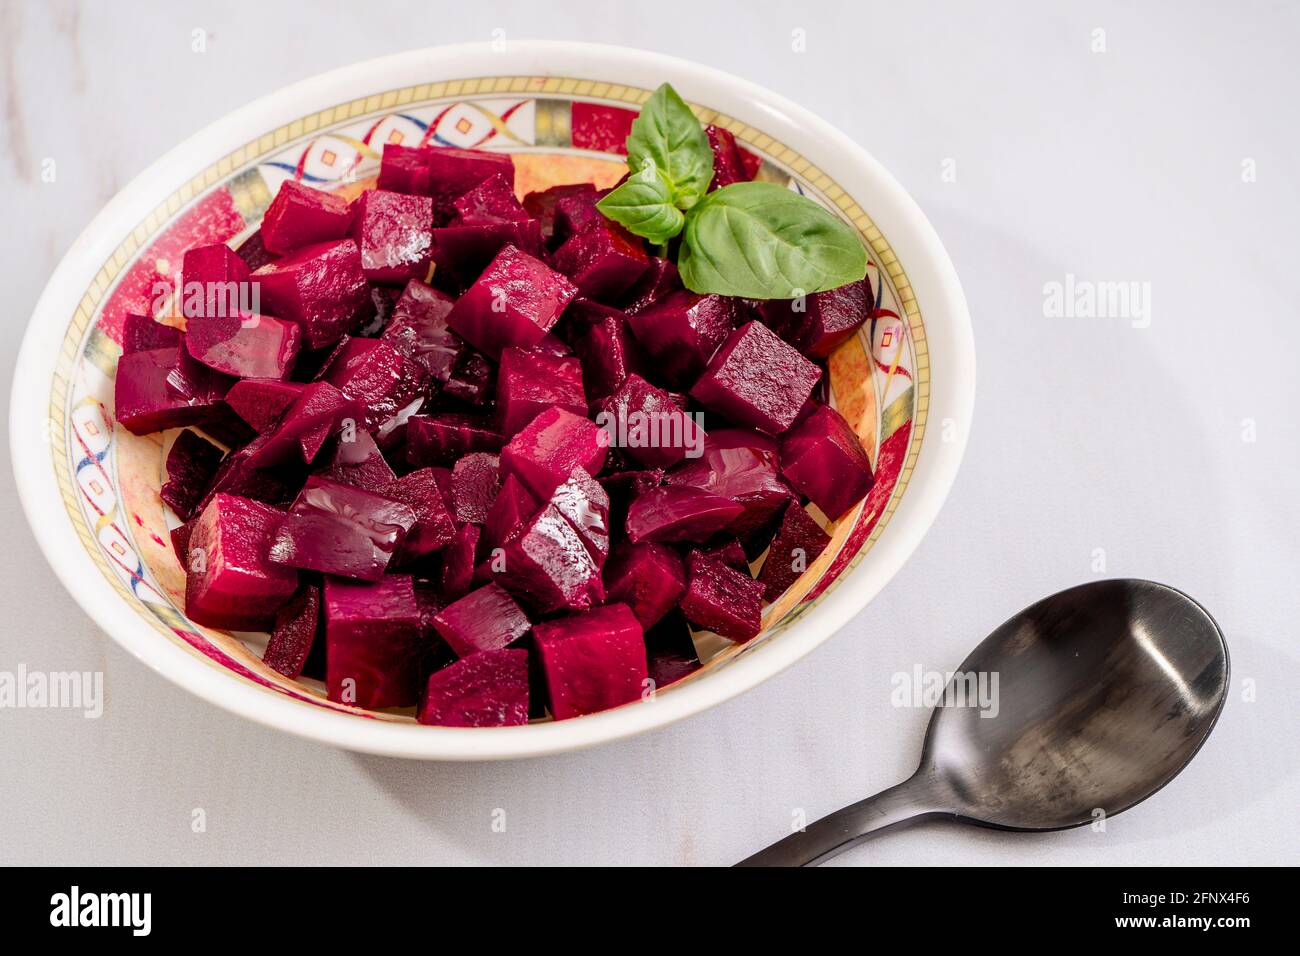 Beet salad with olive oil and basil in a plate on a white marble background. Fresh and healthy vegetables concept. Stock Photo